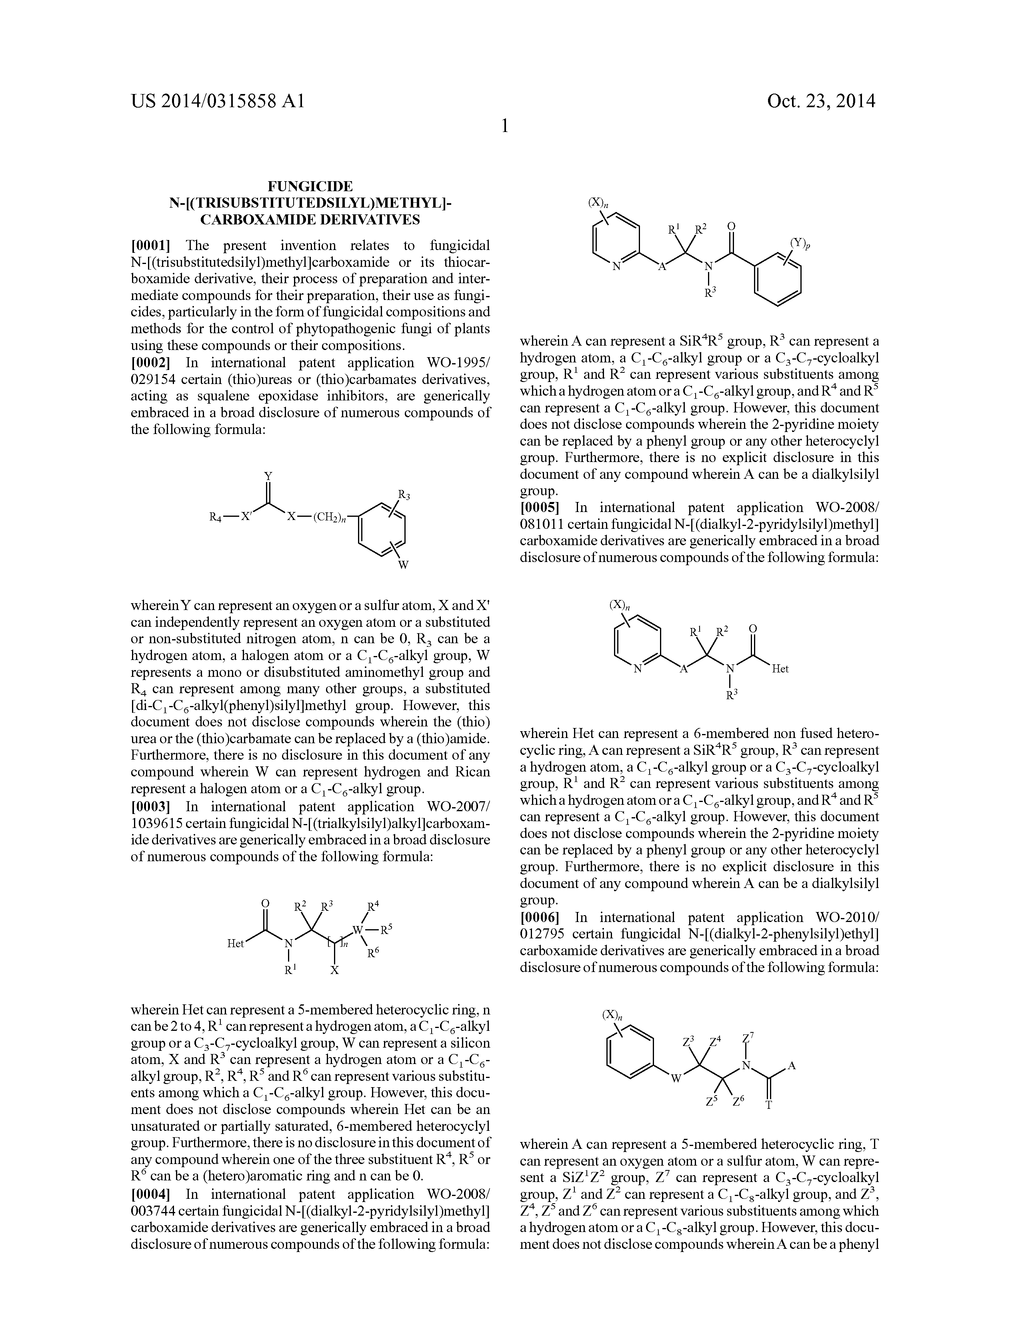 FUNGICIDE N-[(TRISUBSTITUTEDSILYL)METHYL]-CARBOXAMIDE DERIVATIVES - diagram, schematic, and image 02